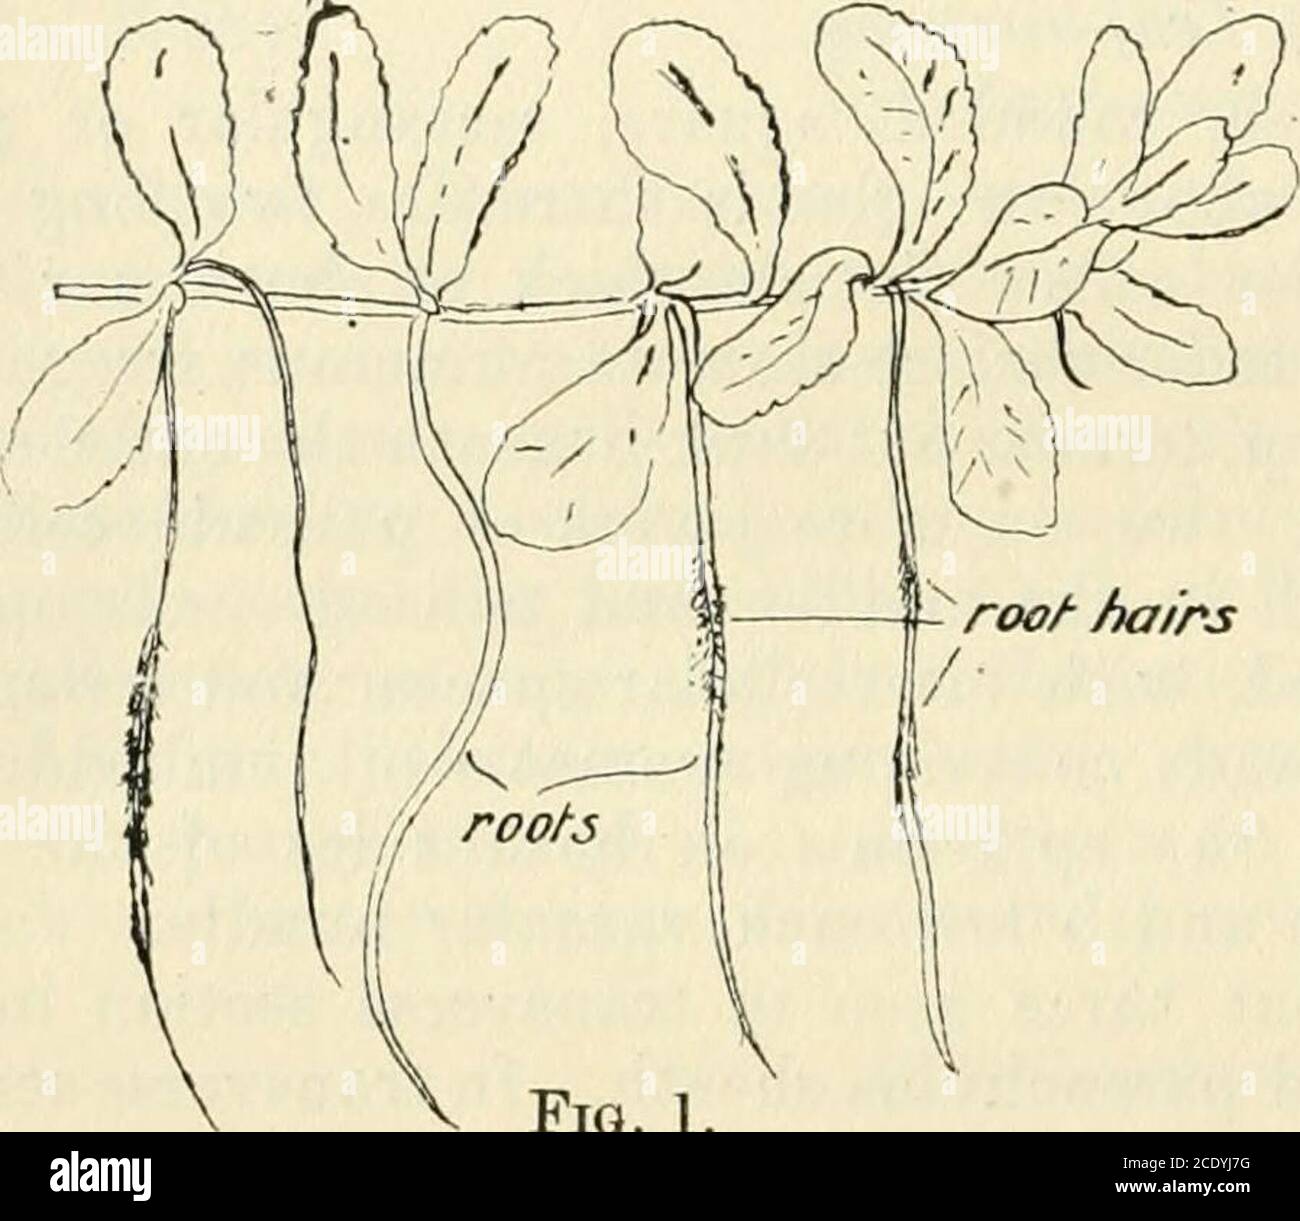 . Transactions and proceedings of the New Zealand Institute . considered along with thevariety of growth-forms, may in general be considered epharmonic. 11. Epilobium Billardierianum. (a.) Habitat.Found in moist sand-hollows. (6.) Groivih-form. Figs. 1 to 3. A small herb with the lower part of the stem rather woody and low-growing, from which arise several stolons running along the ground and * Trans. N.Z. Inst., vol. 44, p. 14. 166 Transactions. giving off rather long adventitious roots and leaves at short intervals.Stem reddish in parts, with tiny white hairs. Leaves glabrous, bright green, Stock Photo